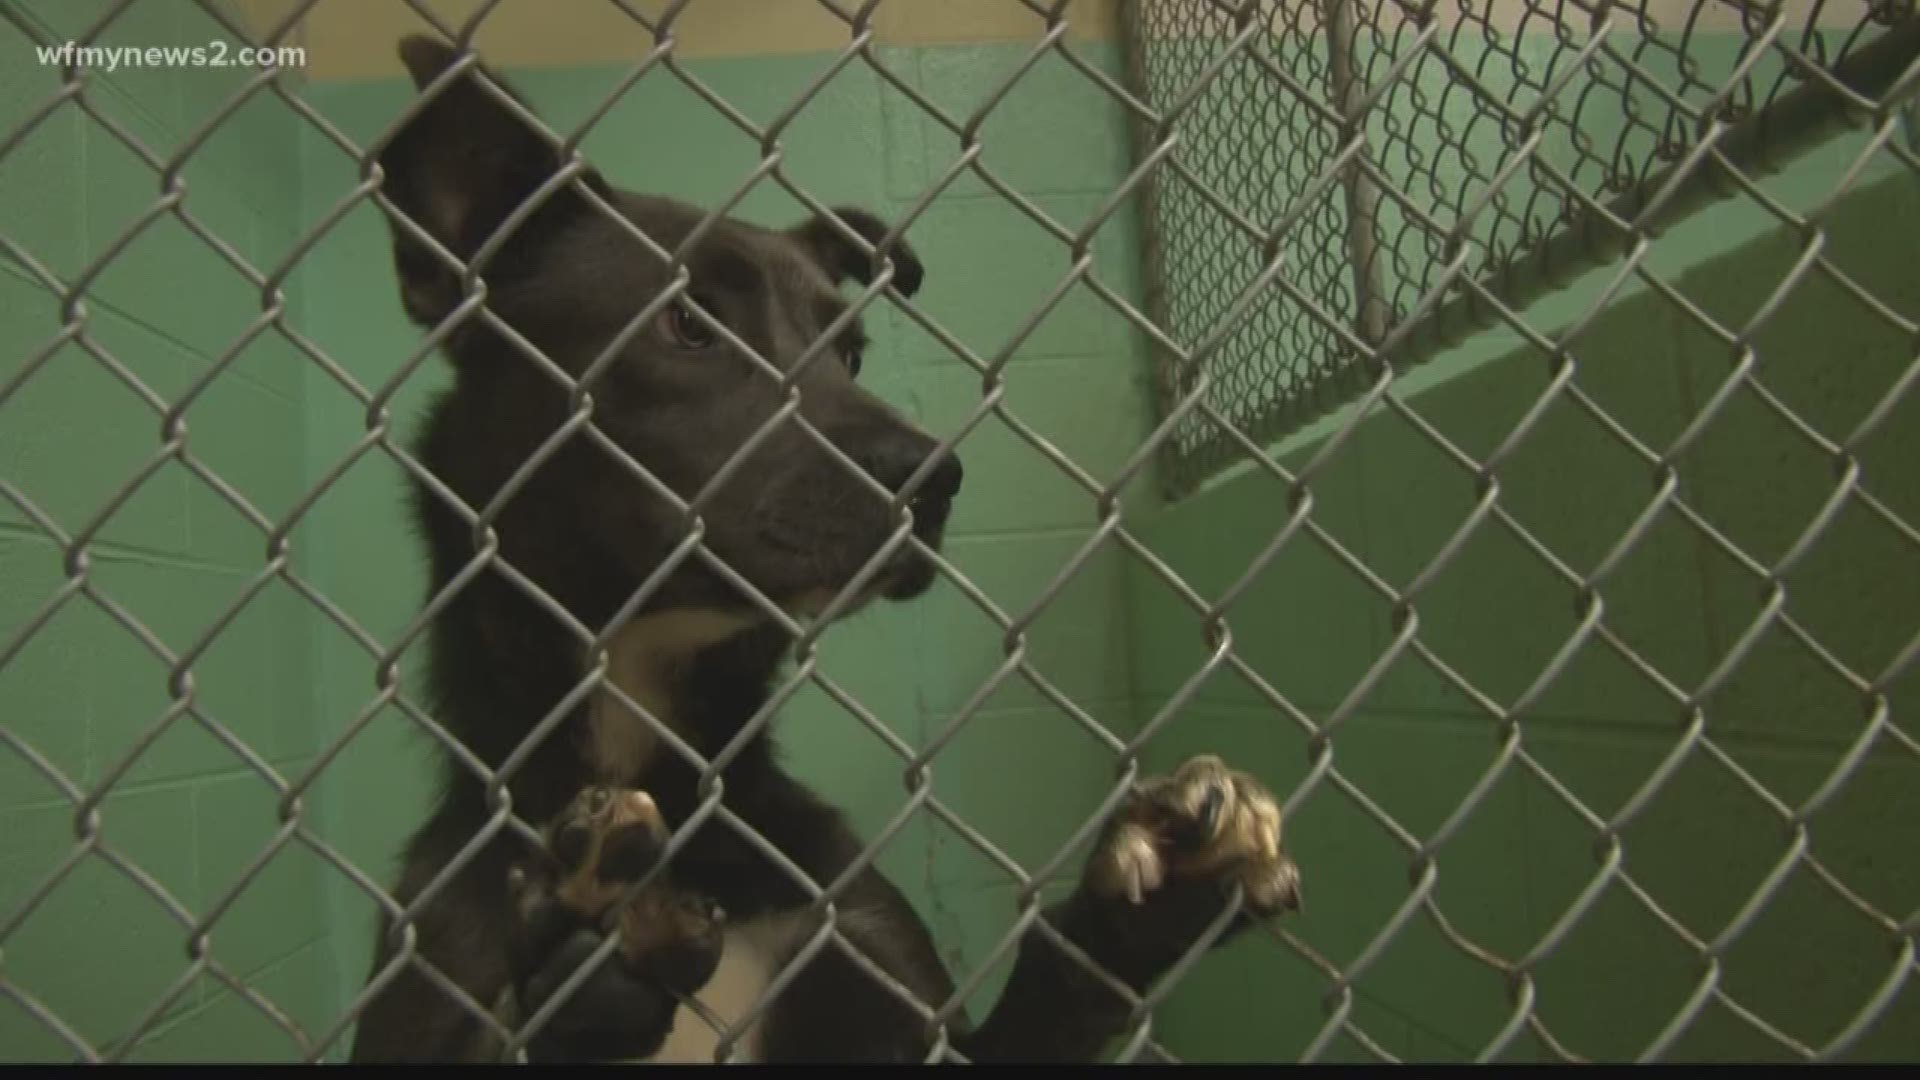 Triad Animal Shelters Work on Overcrowding